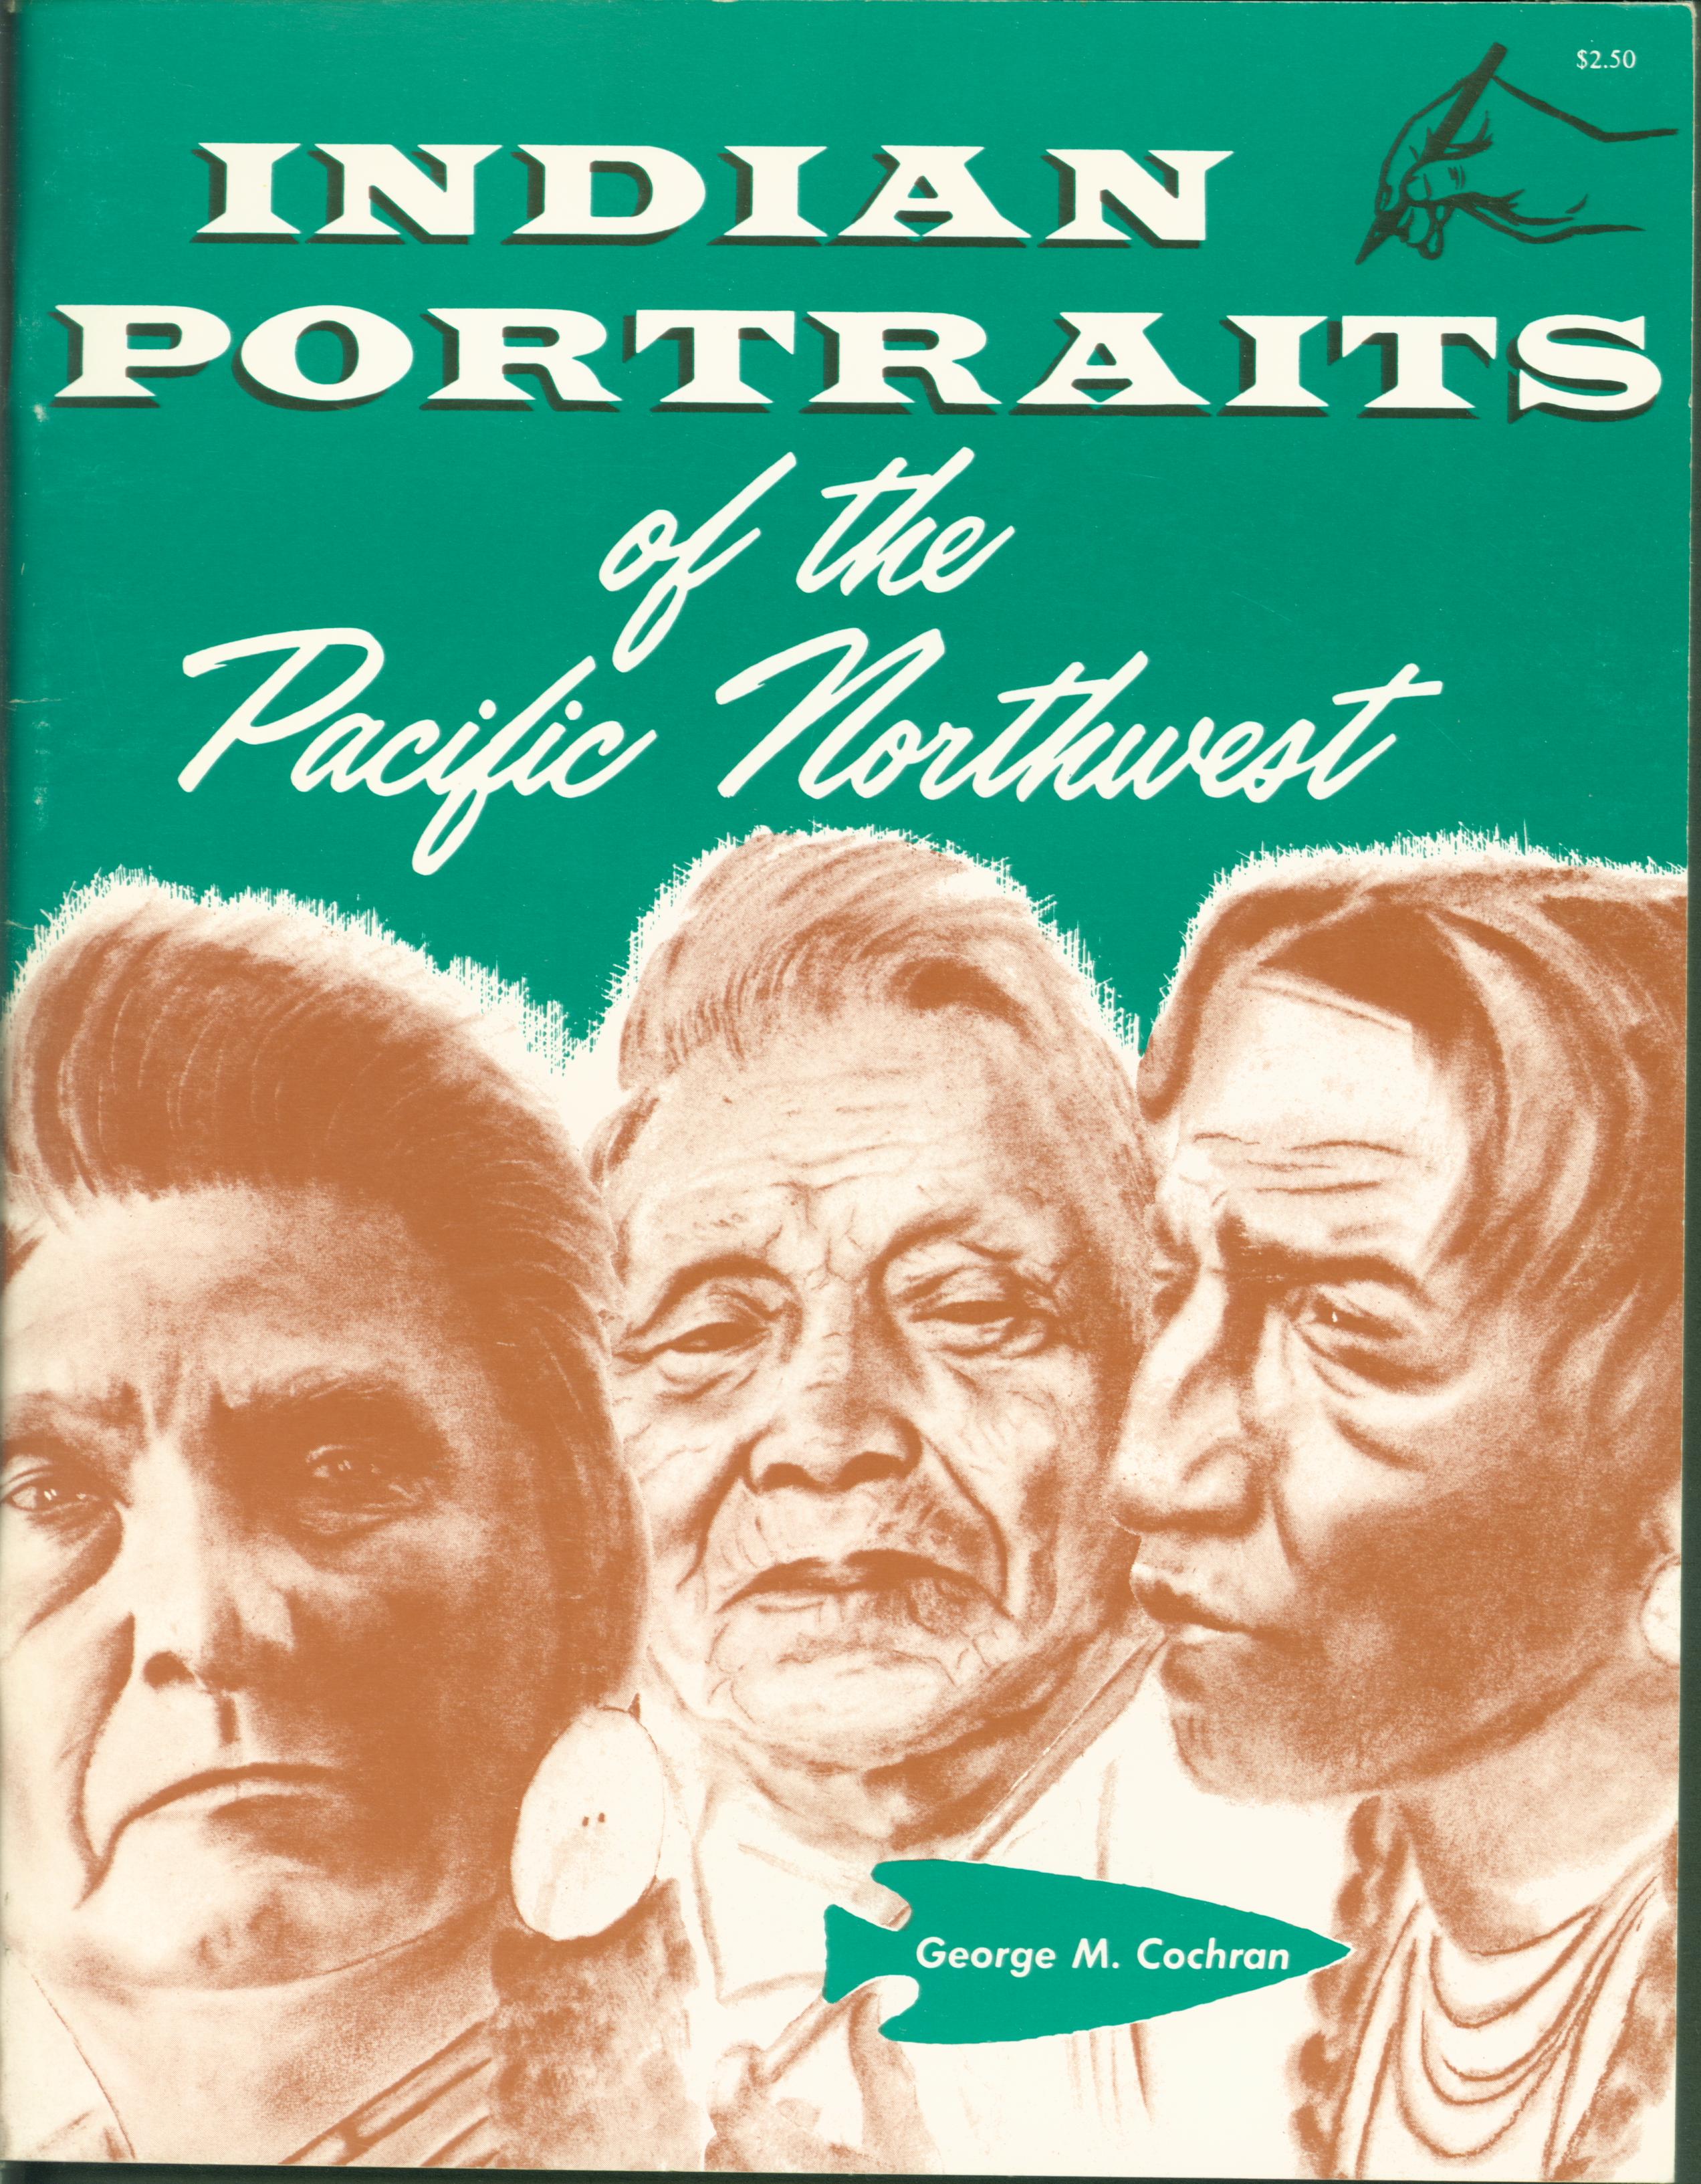 INDIAN PORTRAITS OF THE NORTHWEST.